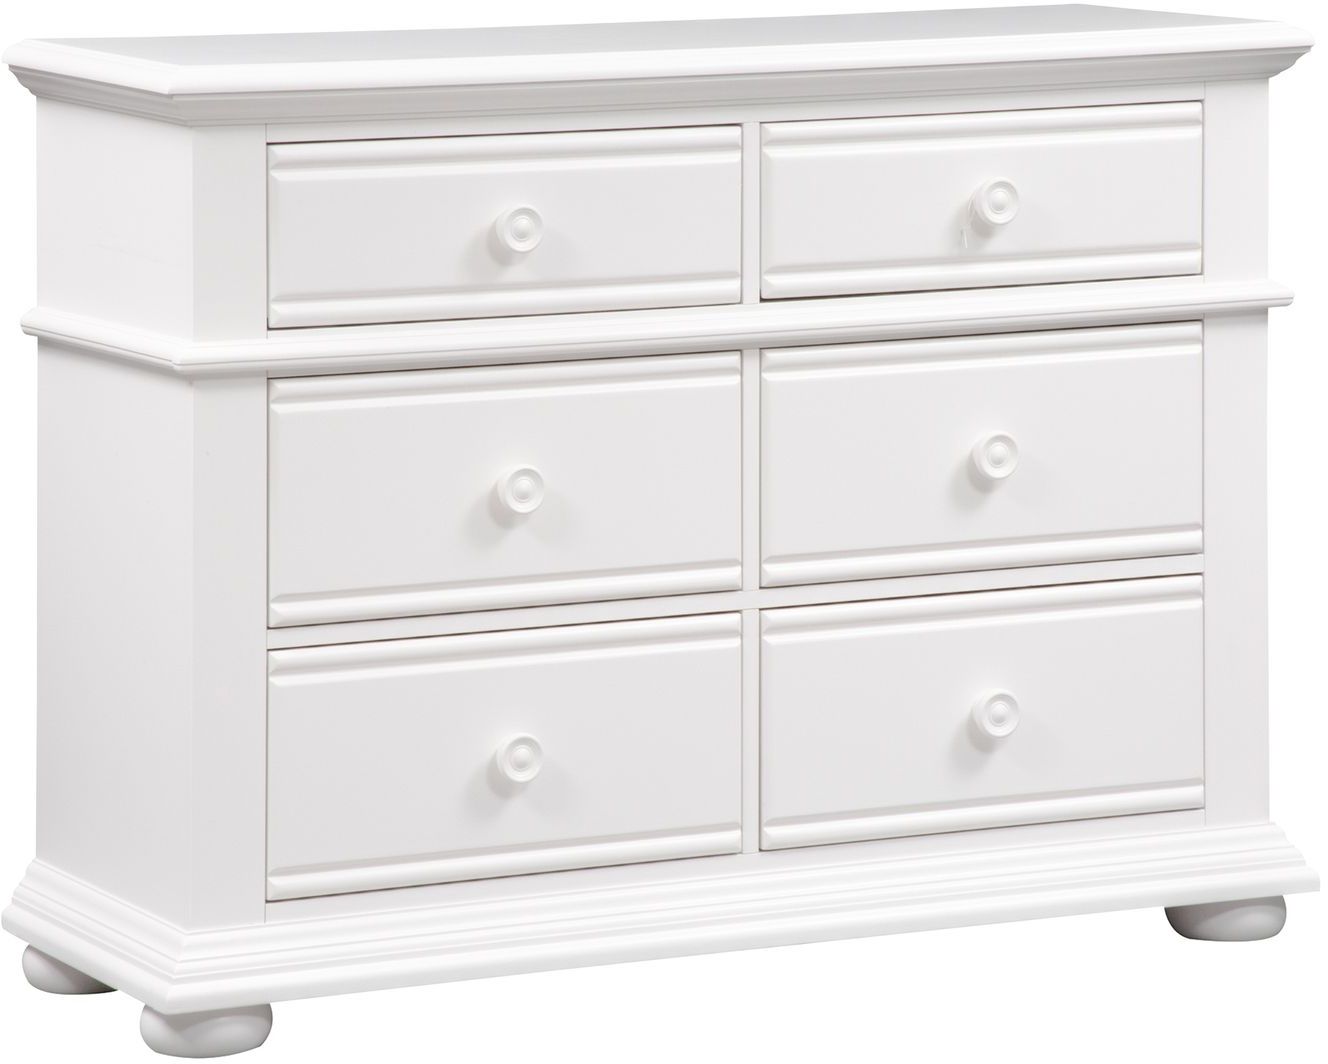 Liberty Furniture Summer House Oyster White Youth Dresser